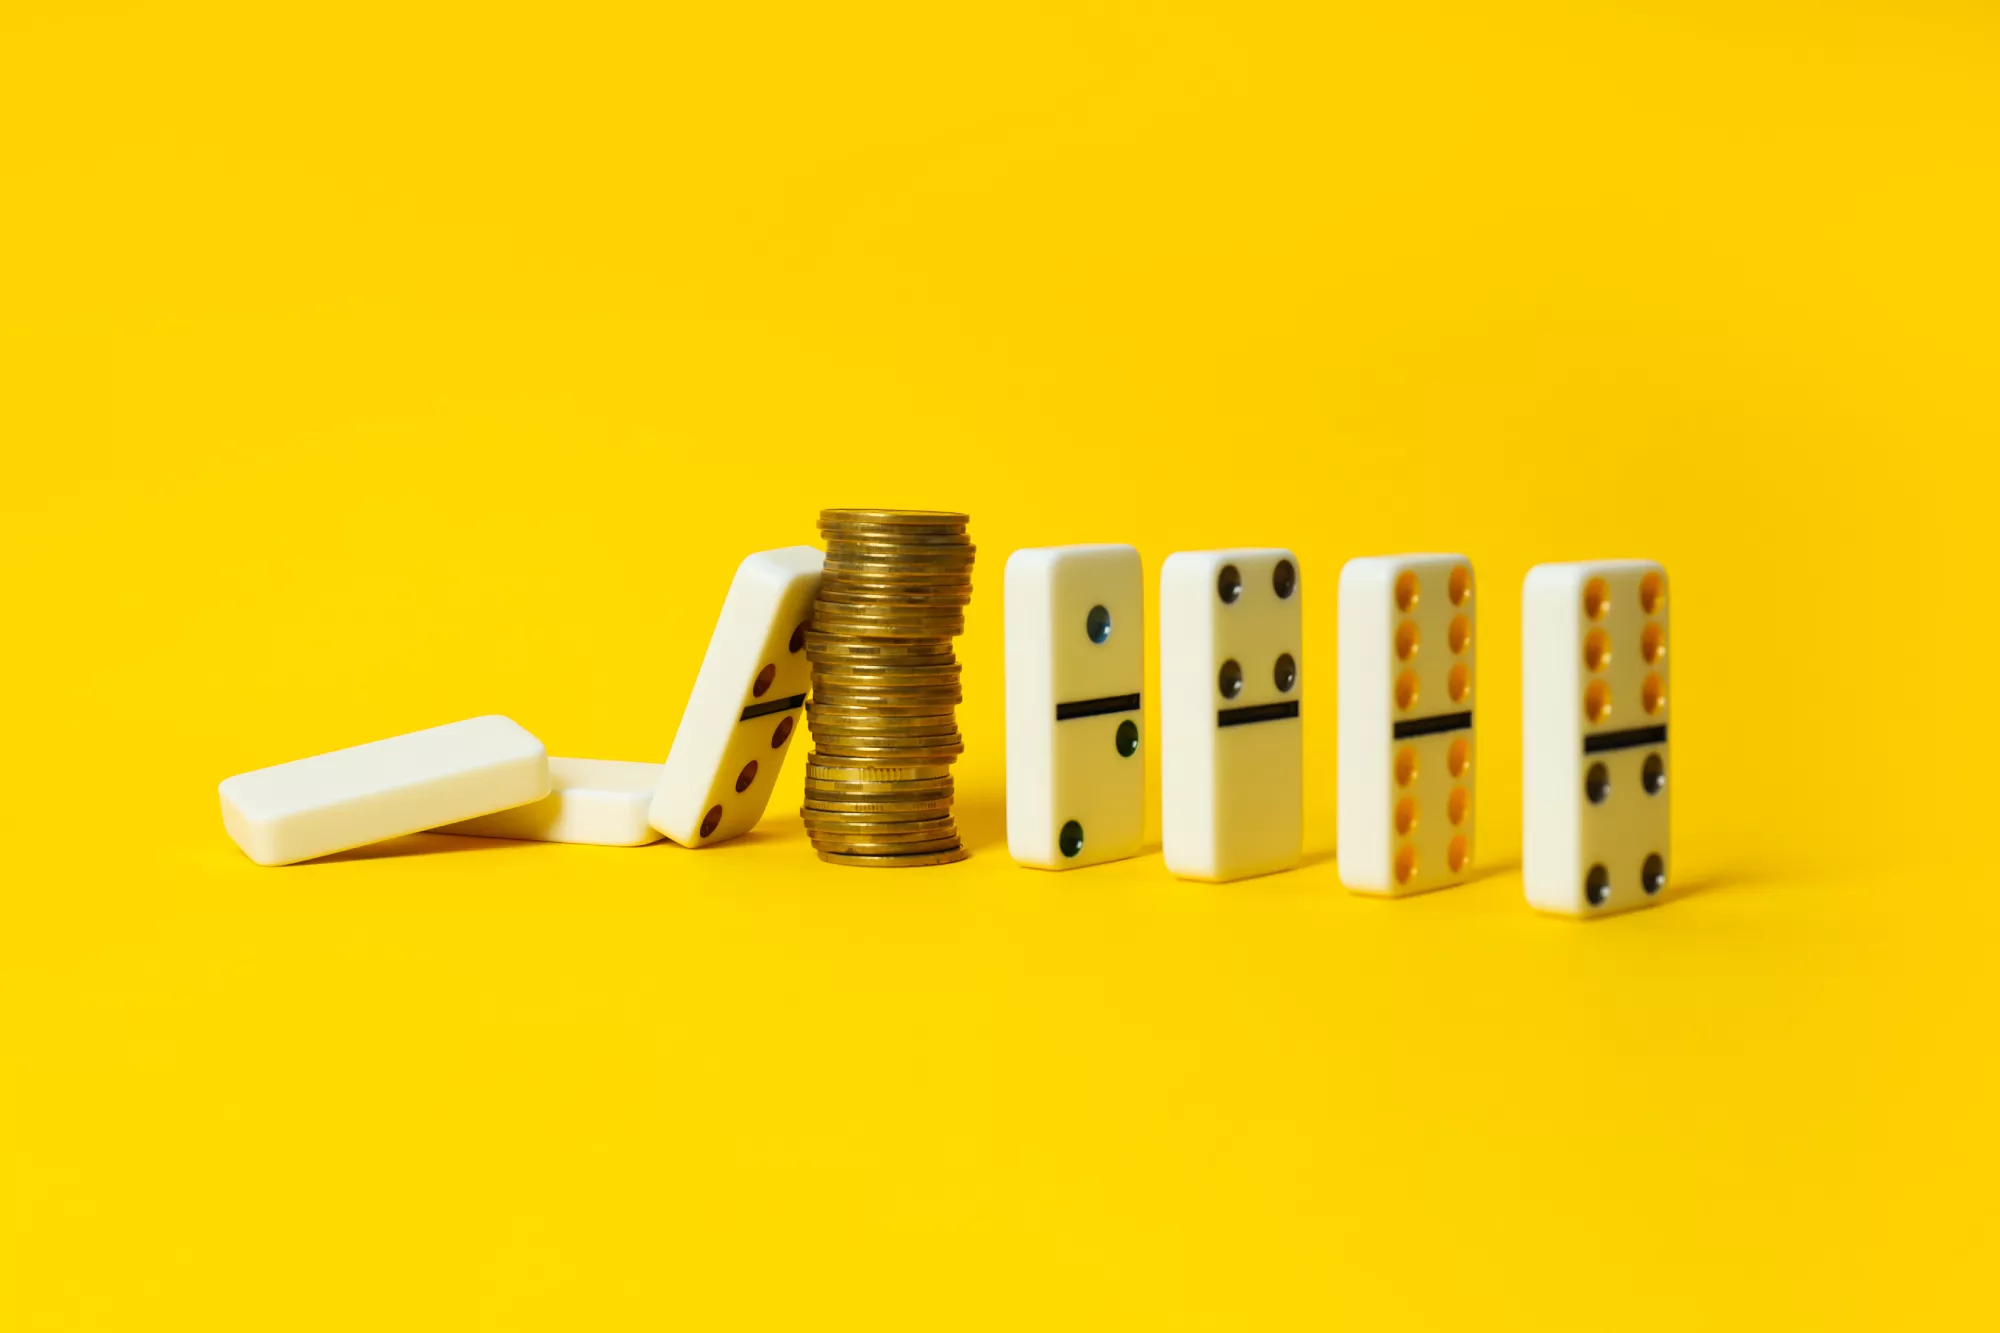 dominos and a stack of change against a yellow background representing recession-proof businesses